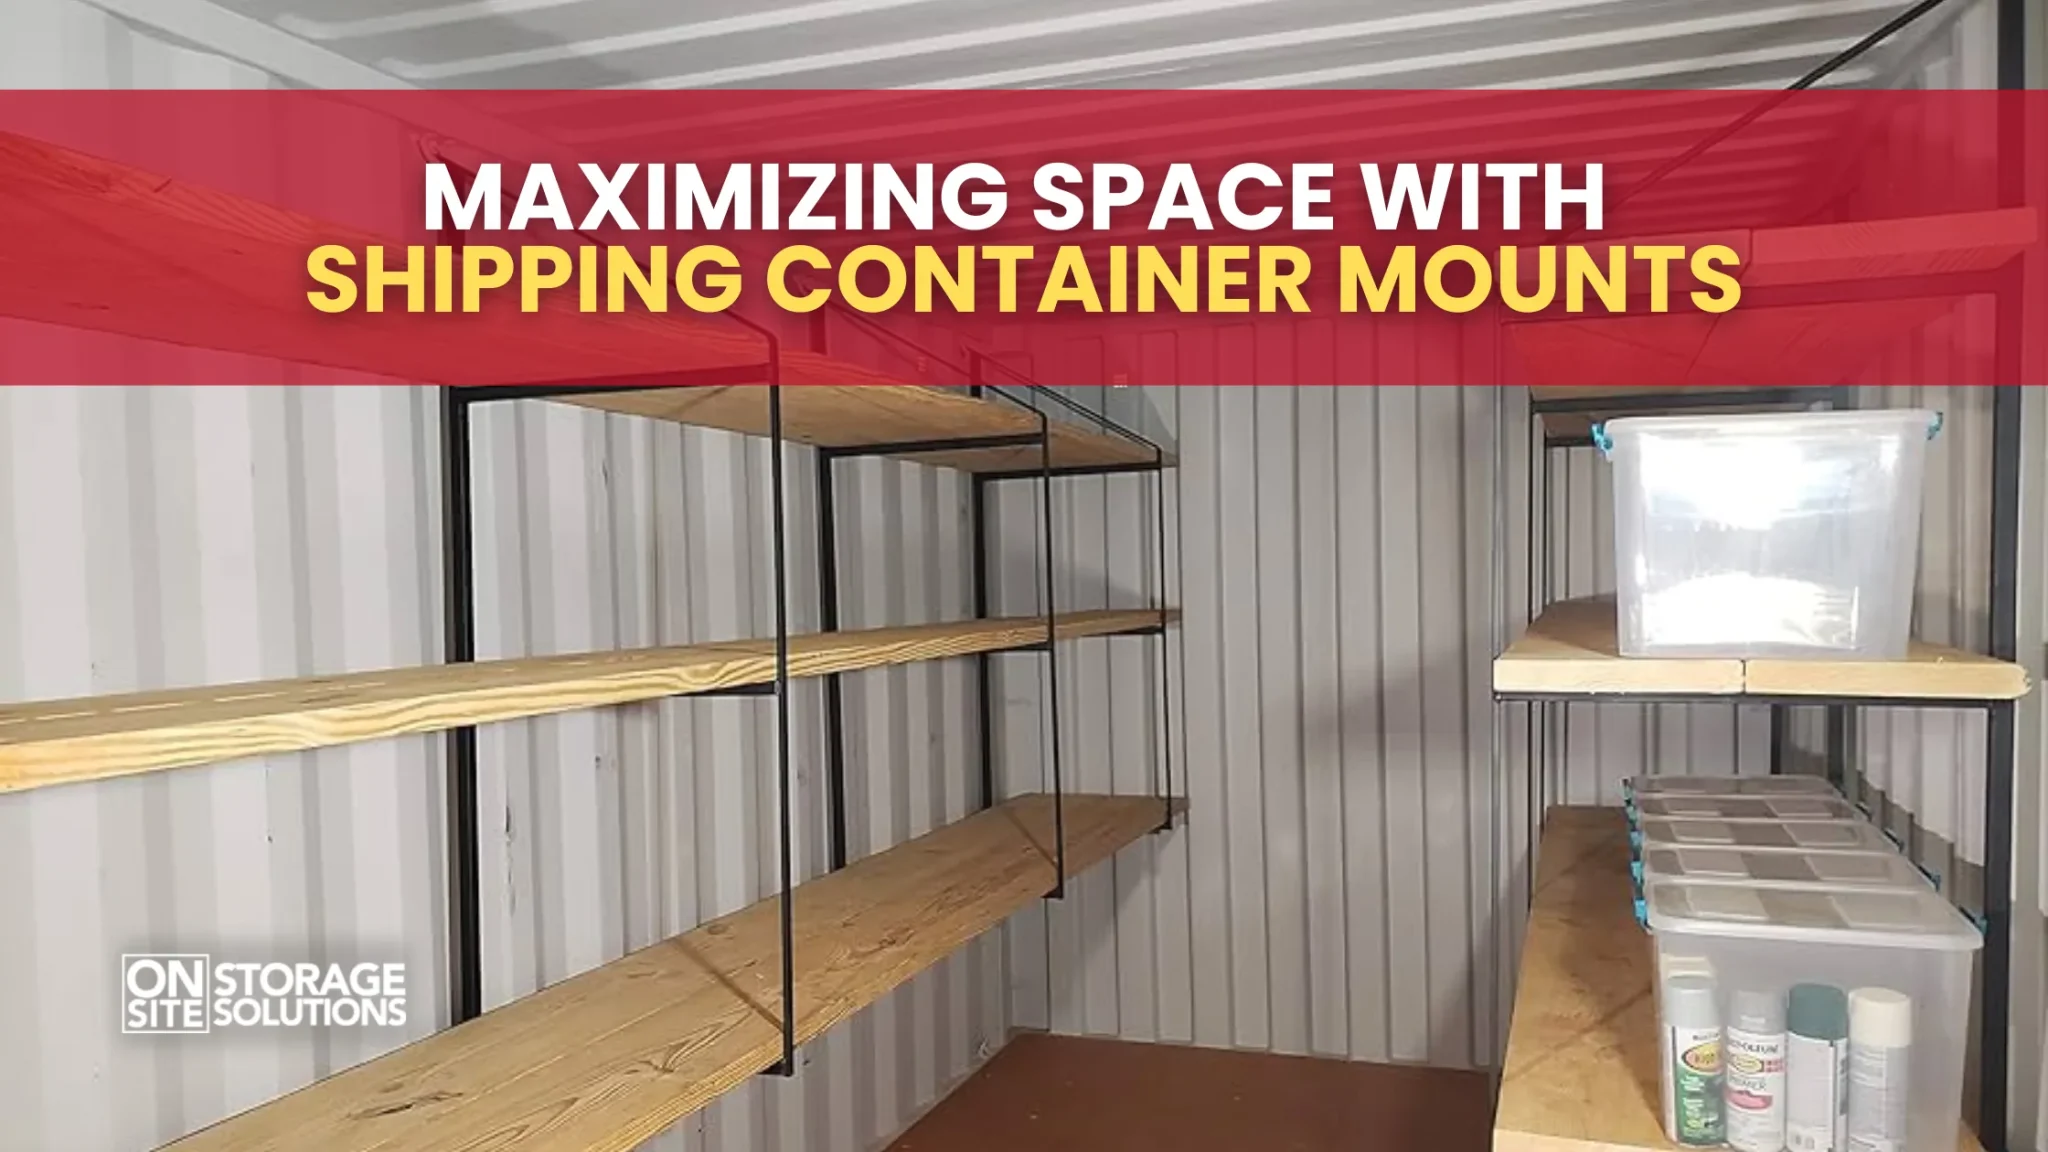 Maximizing Space with Shipping Container Mounts